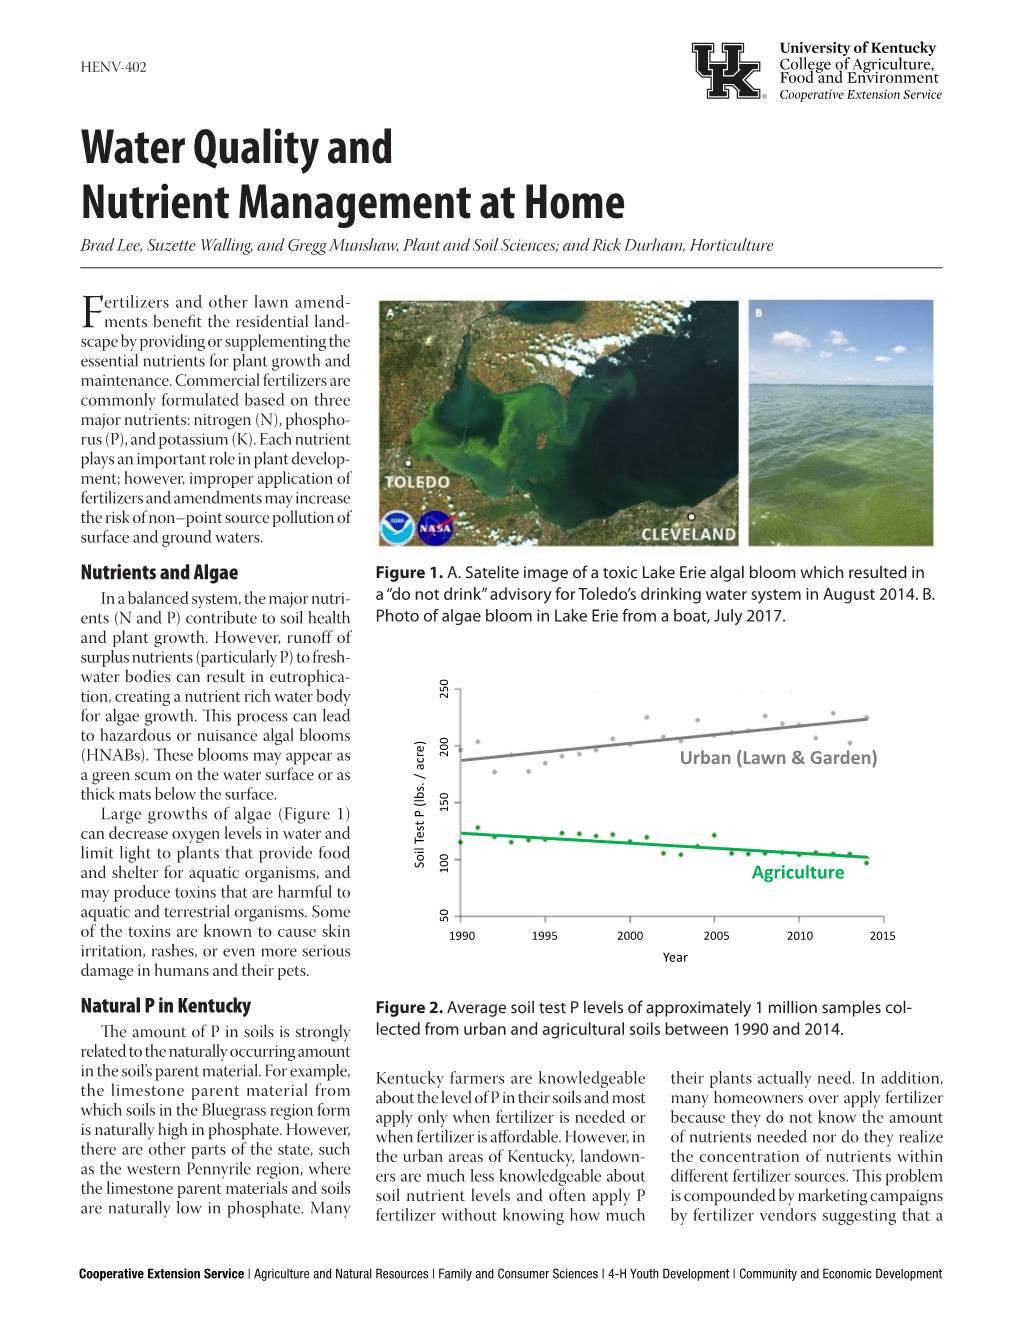 HENV-402: Water Quality and Nutrient Management at Home